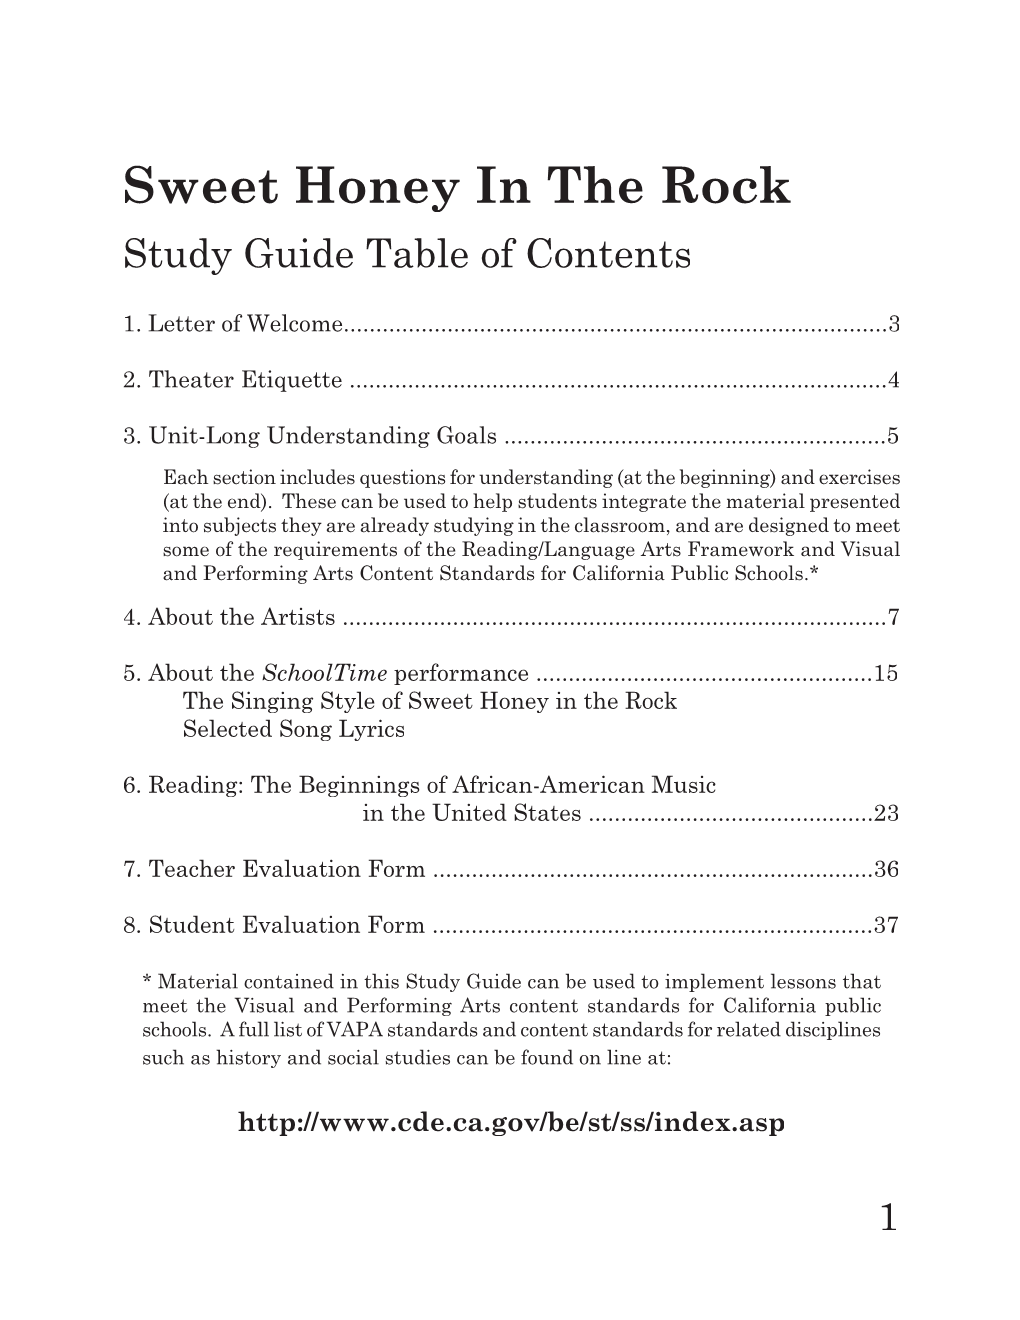 Sweet Honey in the Rock Study Guide Table of Contents